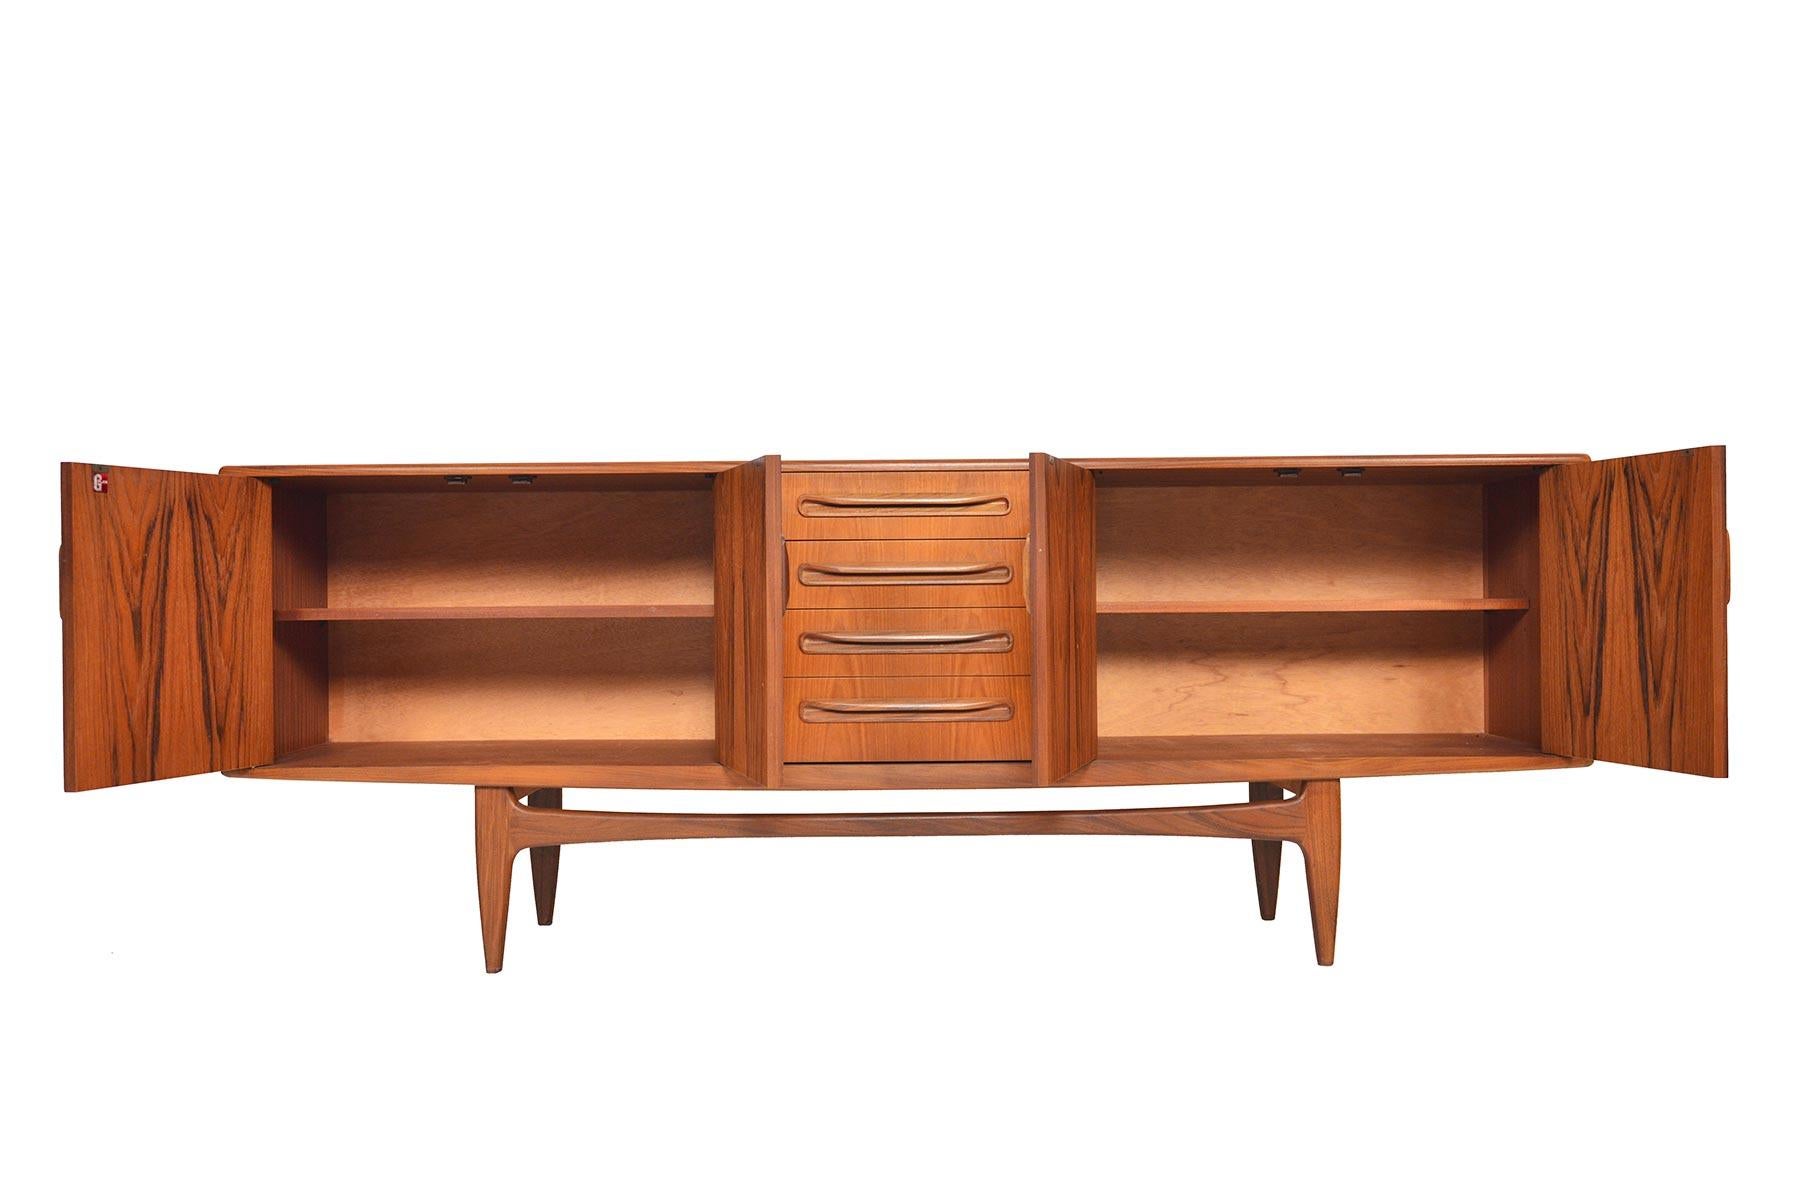 This large Mid-Century Modern G Plan Fresco teak credenza was designed by Victor Wilkins in the 1960s. Beautiful afromosia pulls adorn the drawers and doors of this piece. Left and right doors open to reveal adjustable shelving. Case floats upon a